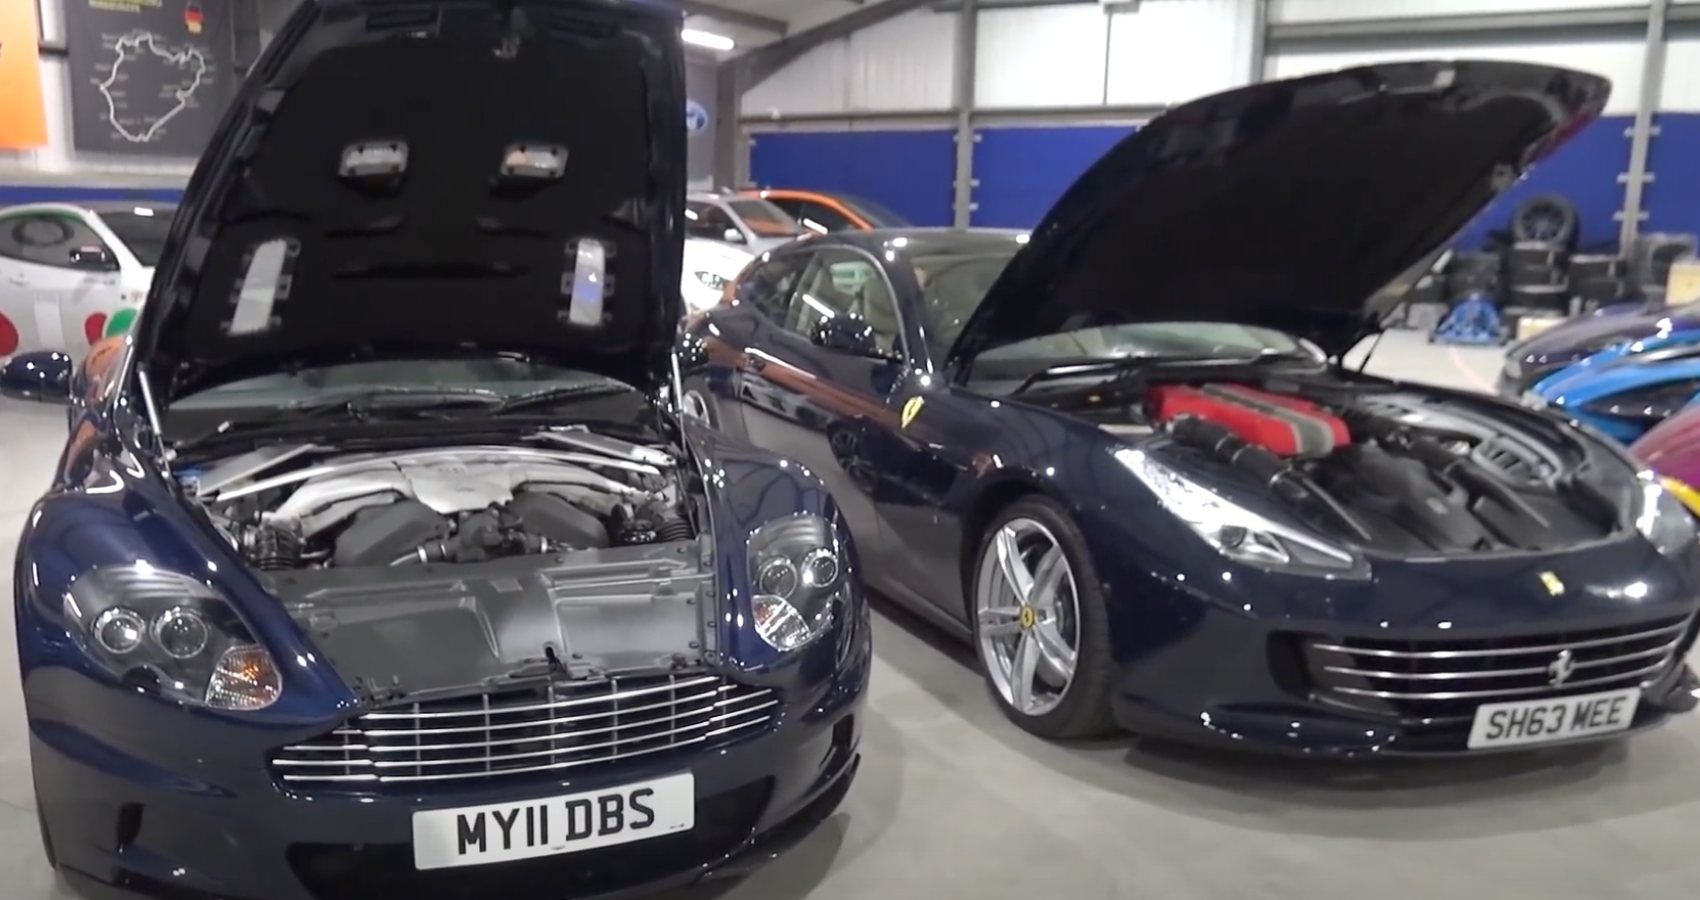 Ferrari Lusso and Aston Martin with their hoods popped